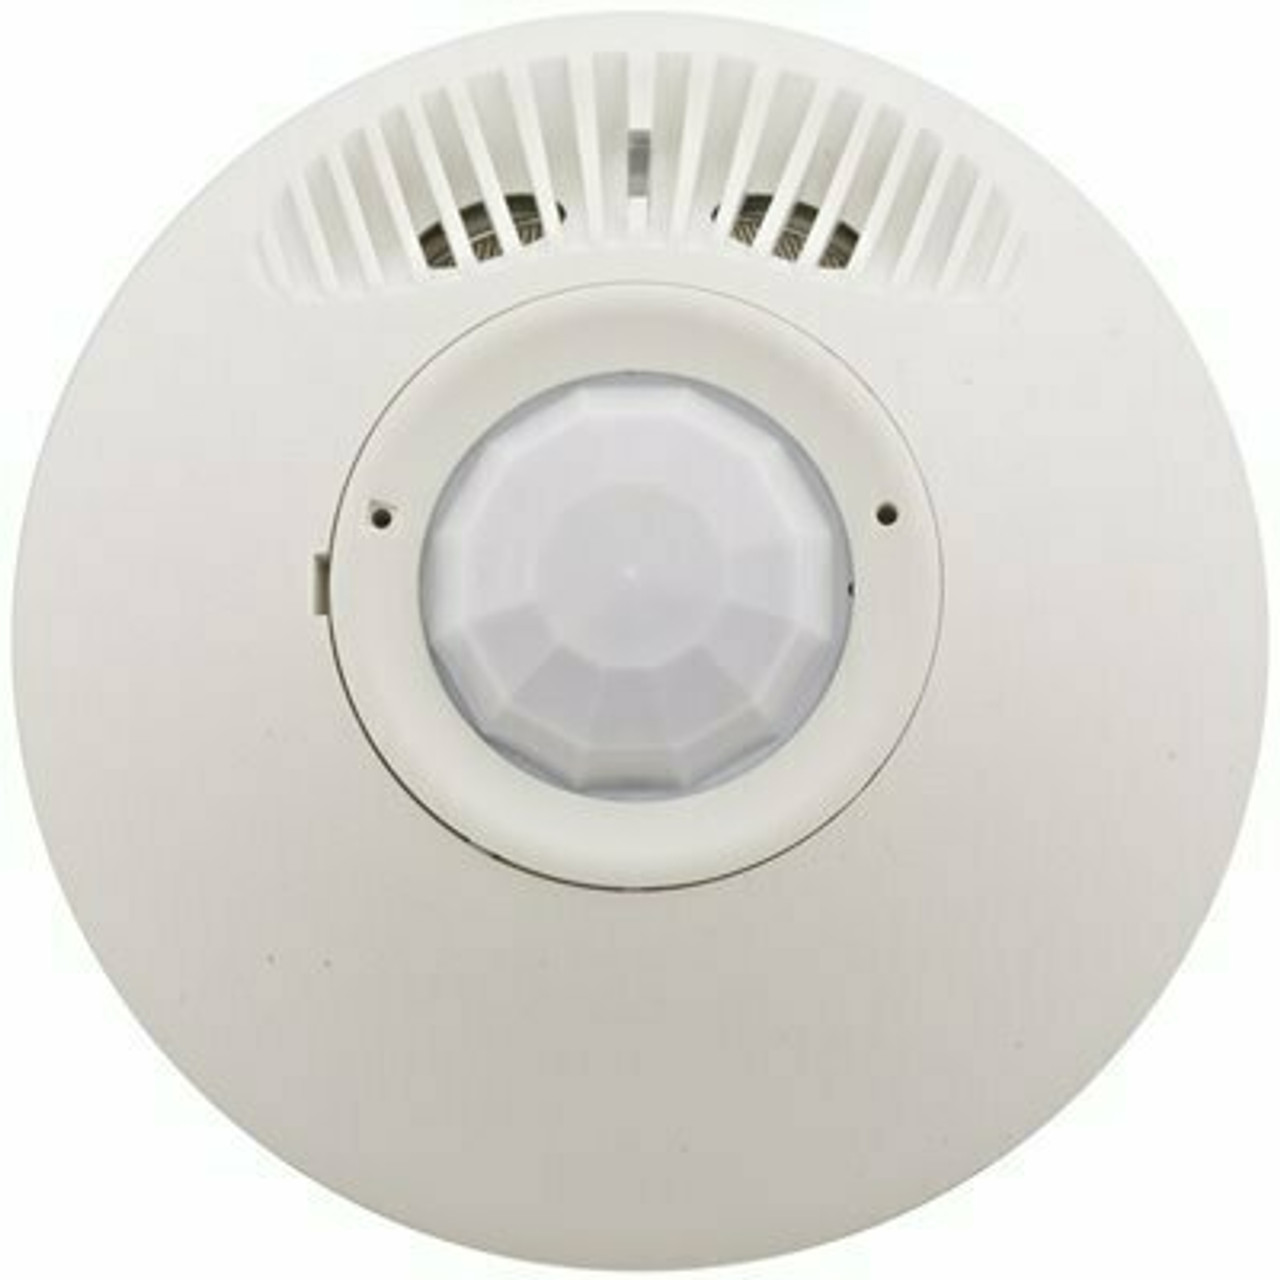 Hubbell Wiring Adaptive Dual (Ultrasonic And Passive Infrared) Ceiling Sensor